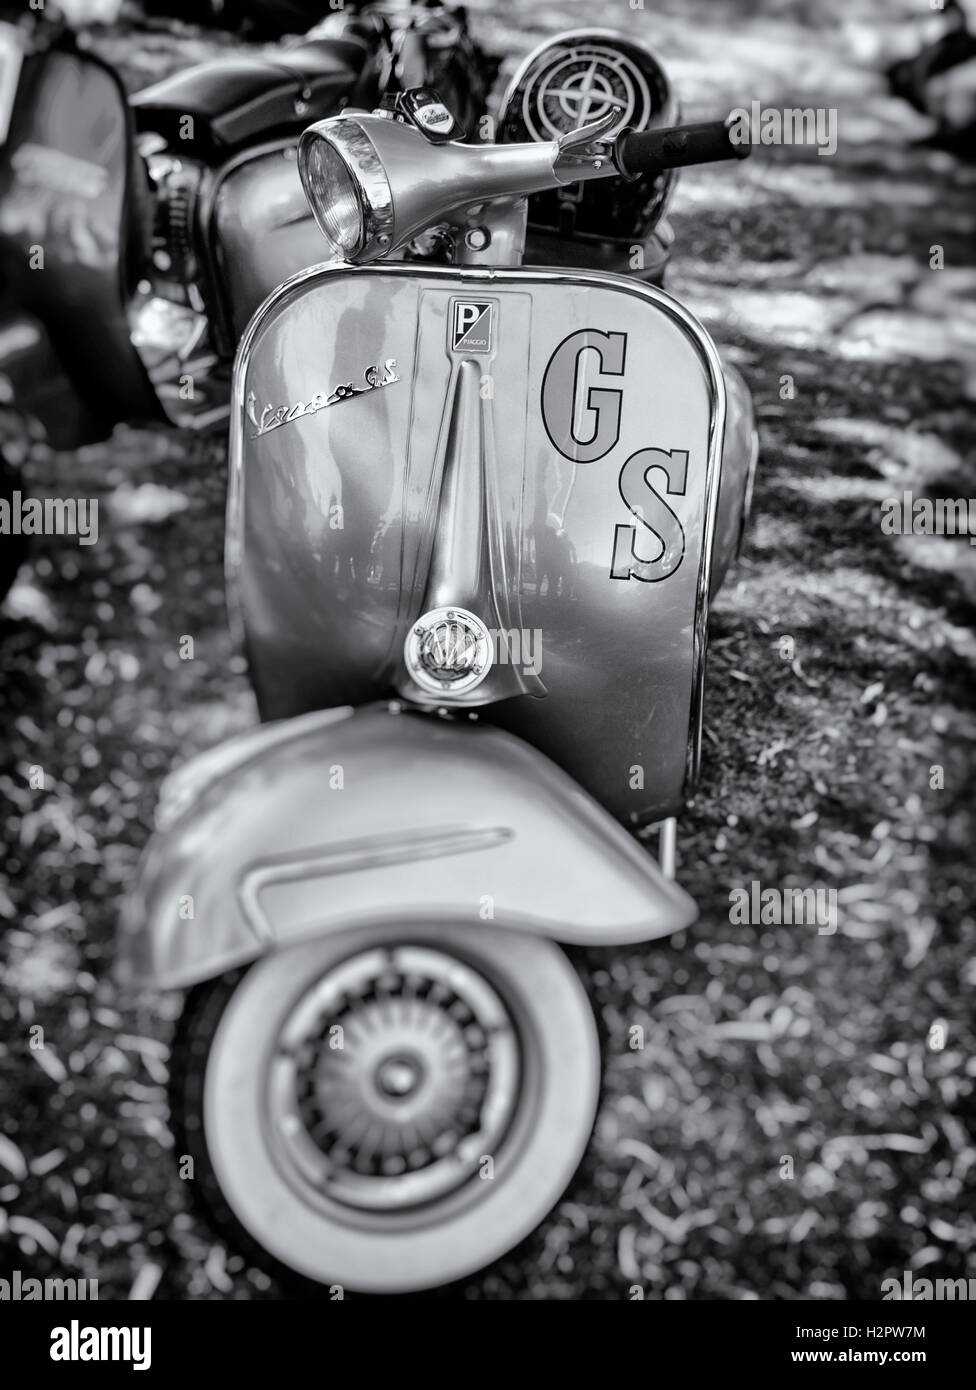 Vespa GS Scooter, first manufactured in 1946, Florence, Italy. Stock Photo